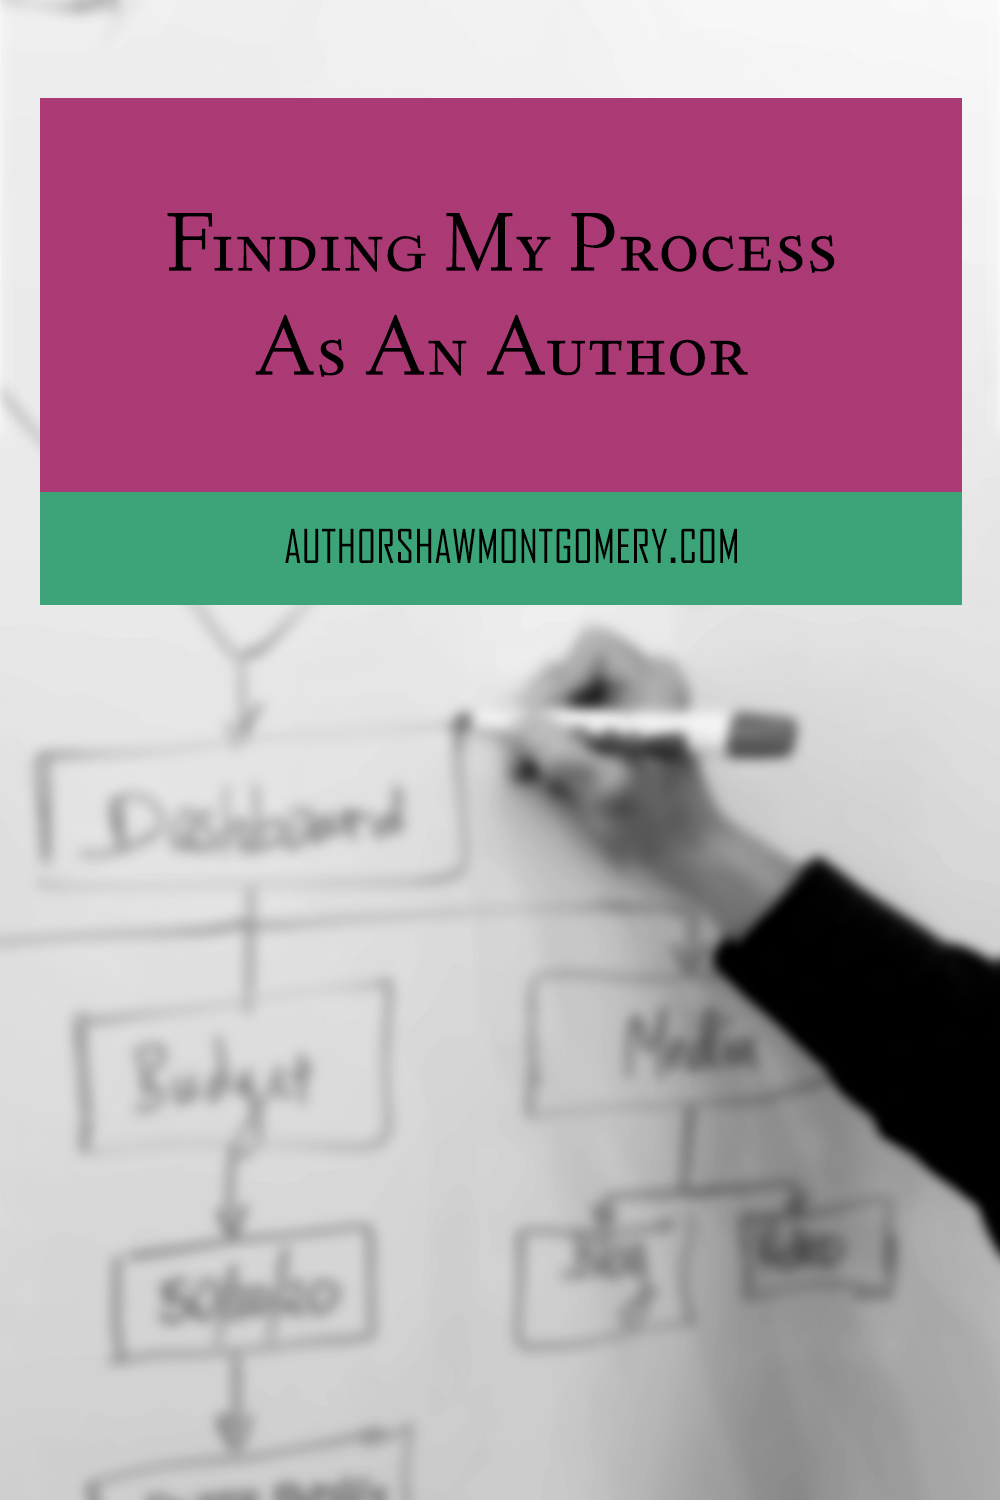 Finding My Process As an Author Blog Post by Shaw Montgomery/MA Innes - at authorshawmontgomery.com 